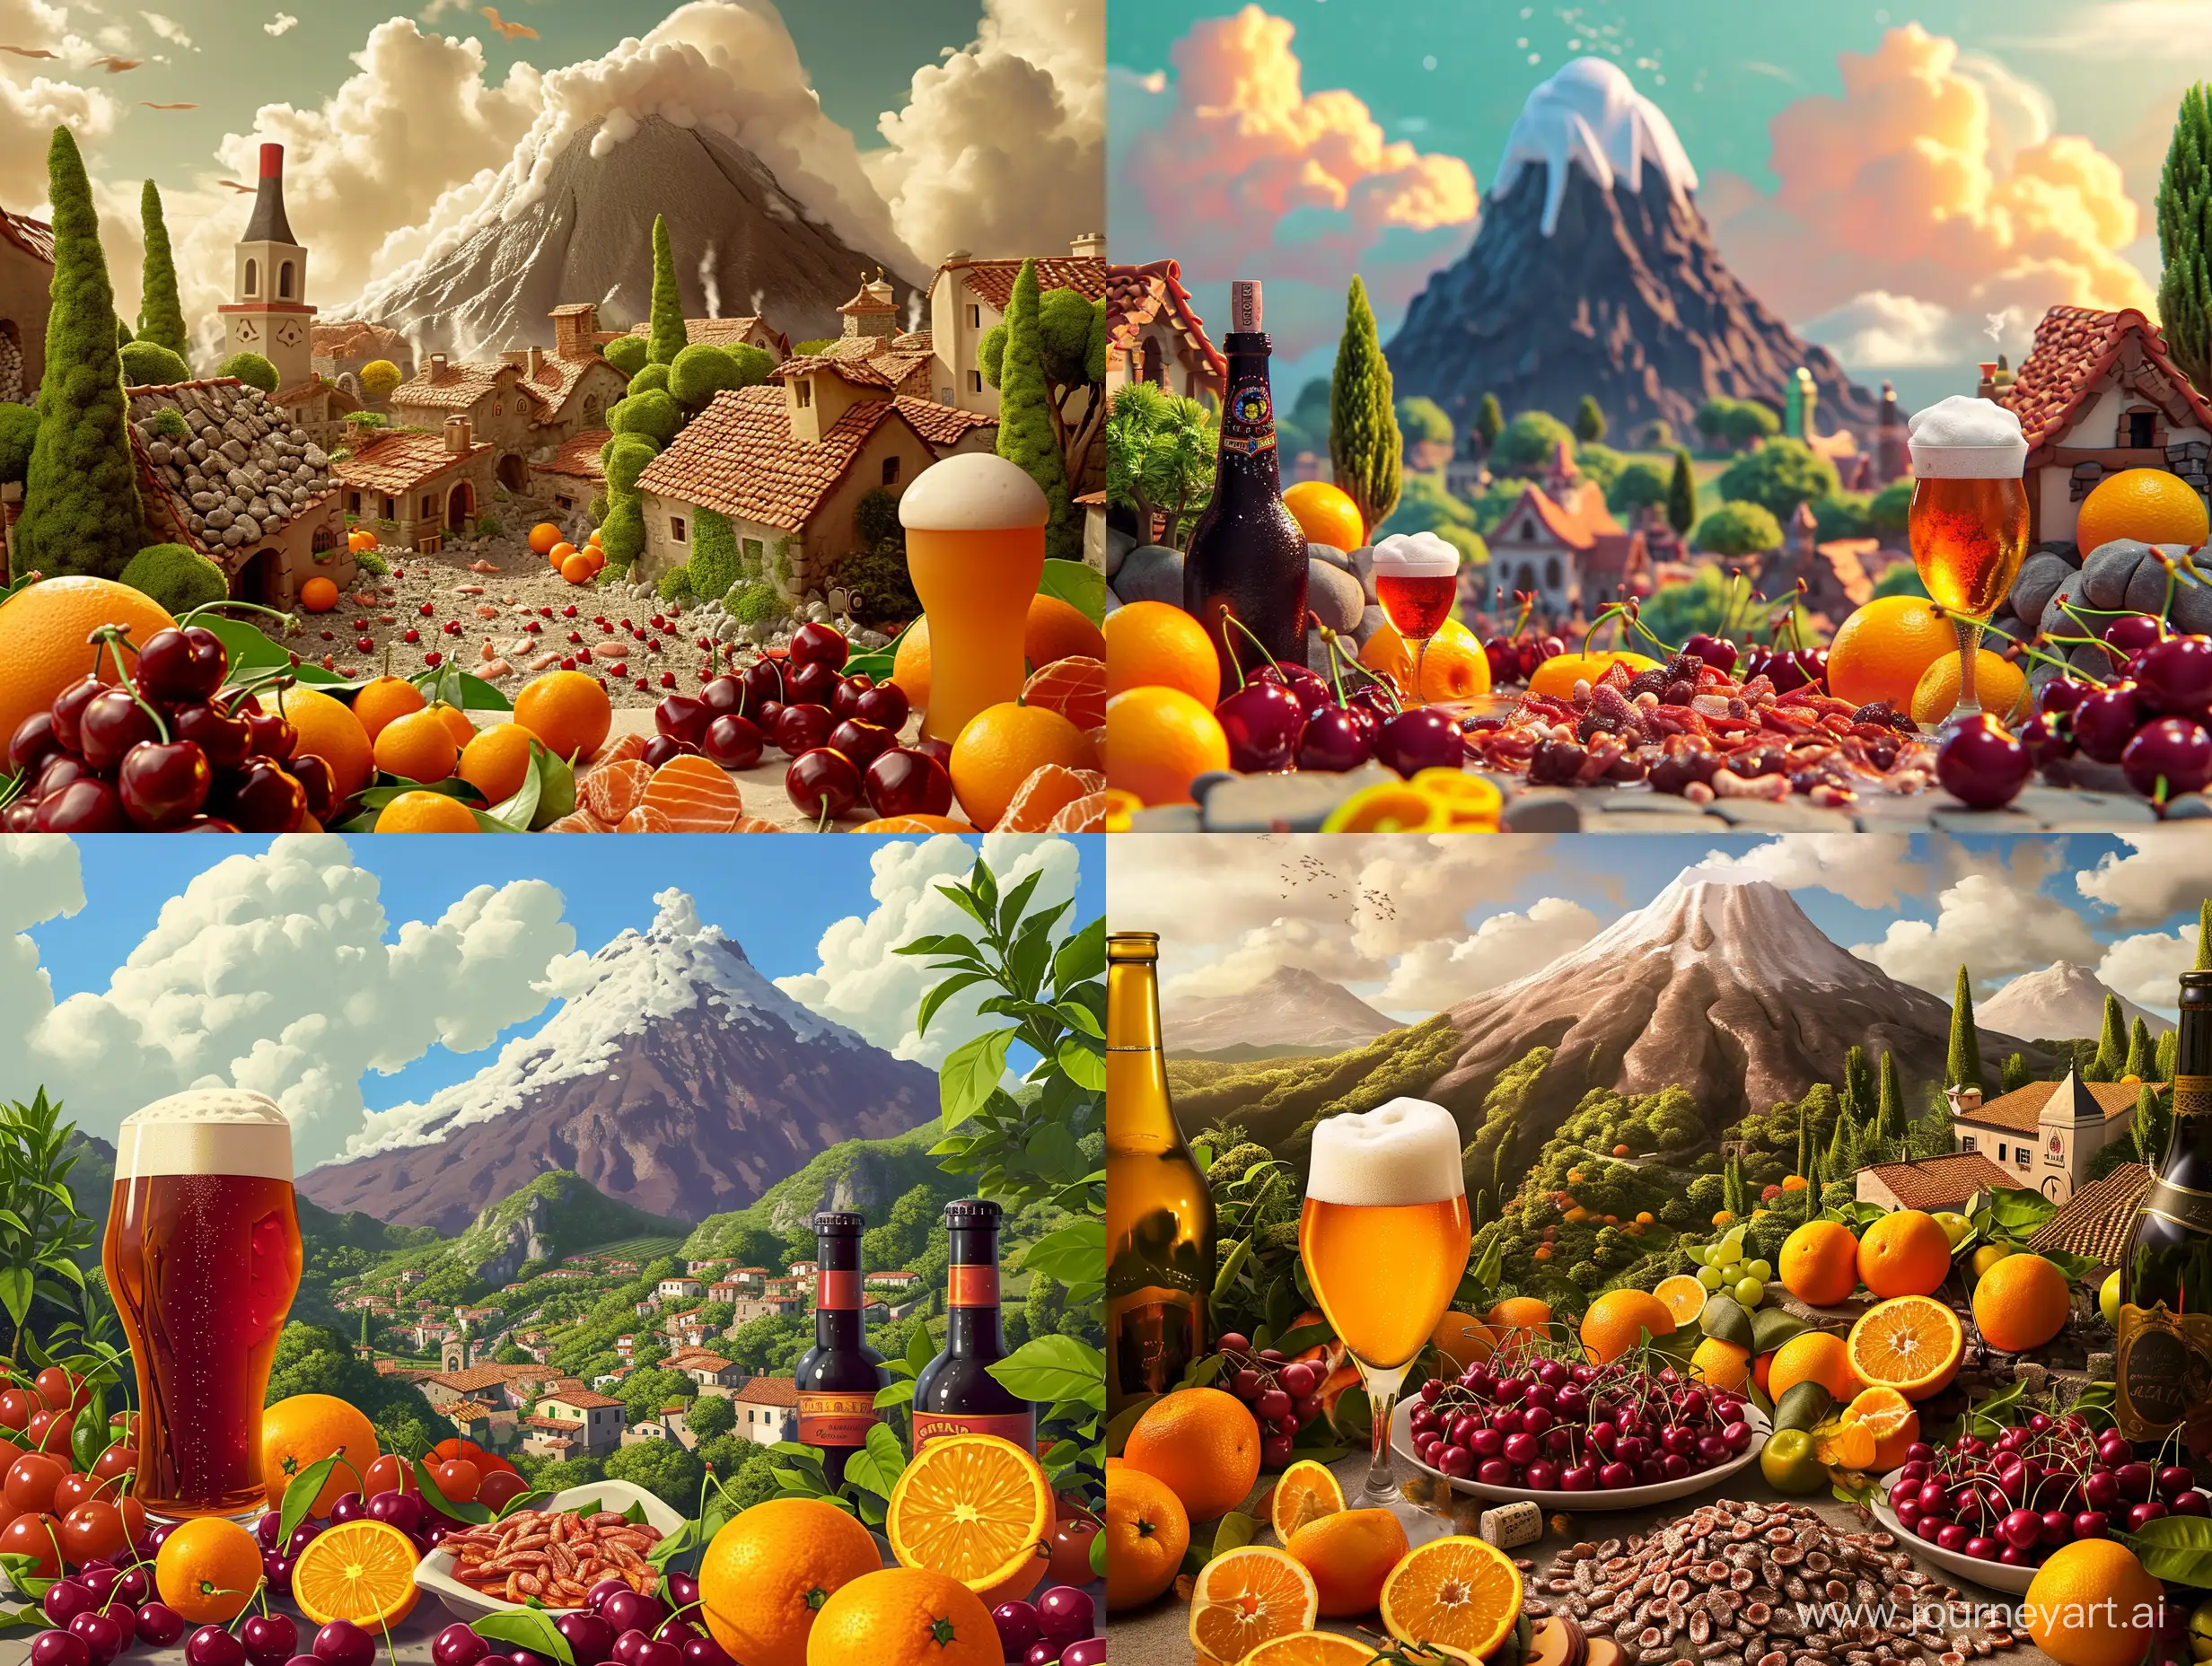 Picturesque-Village-near-Volcano-with-Vibrant-Fruits-and-Festive-Drinks